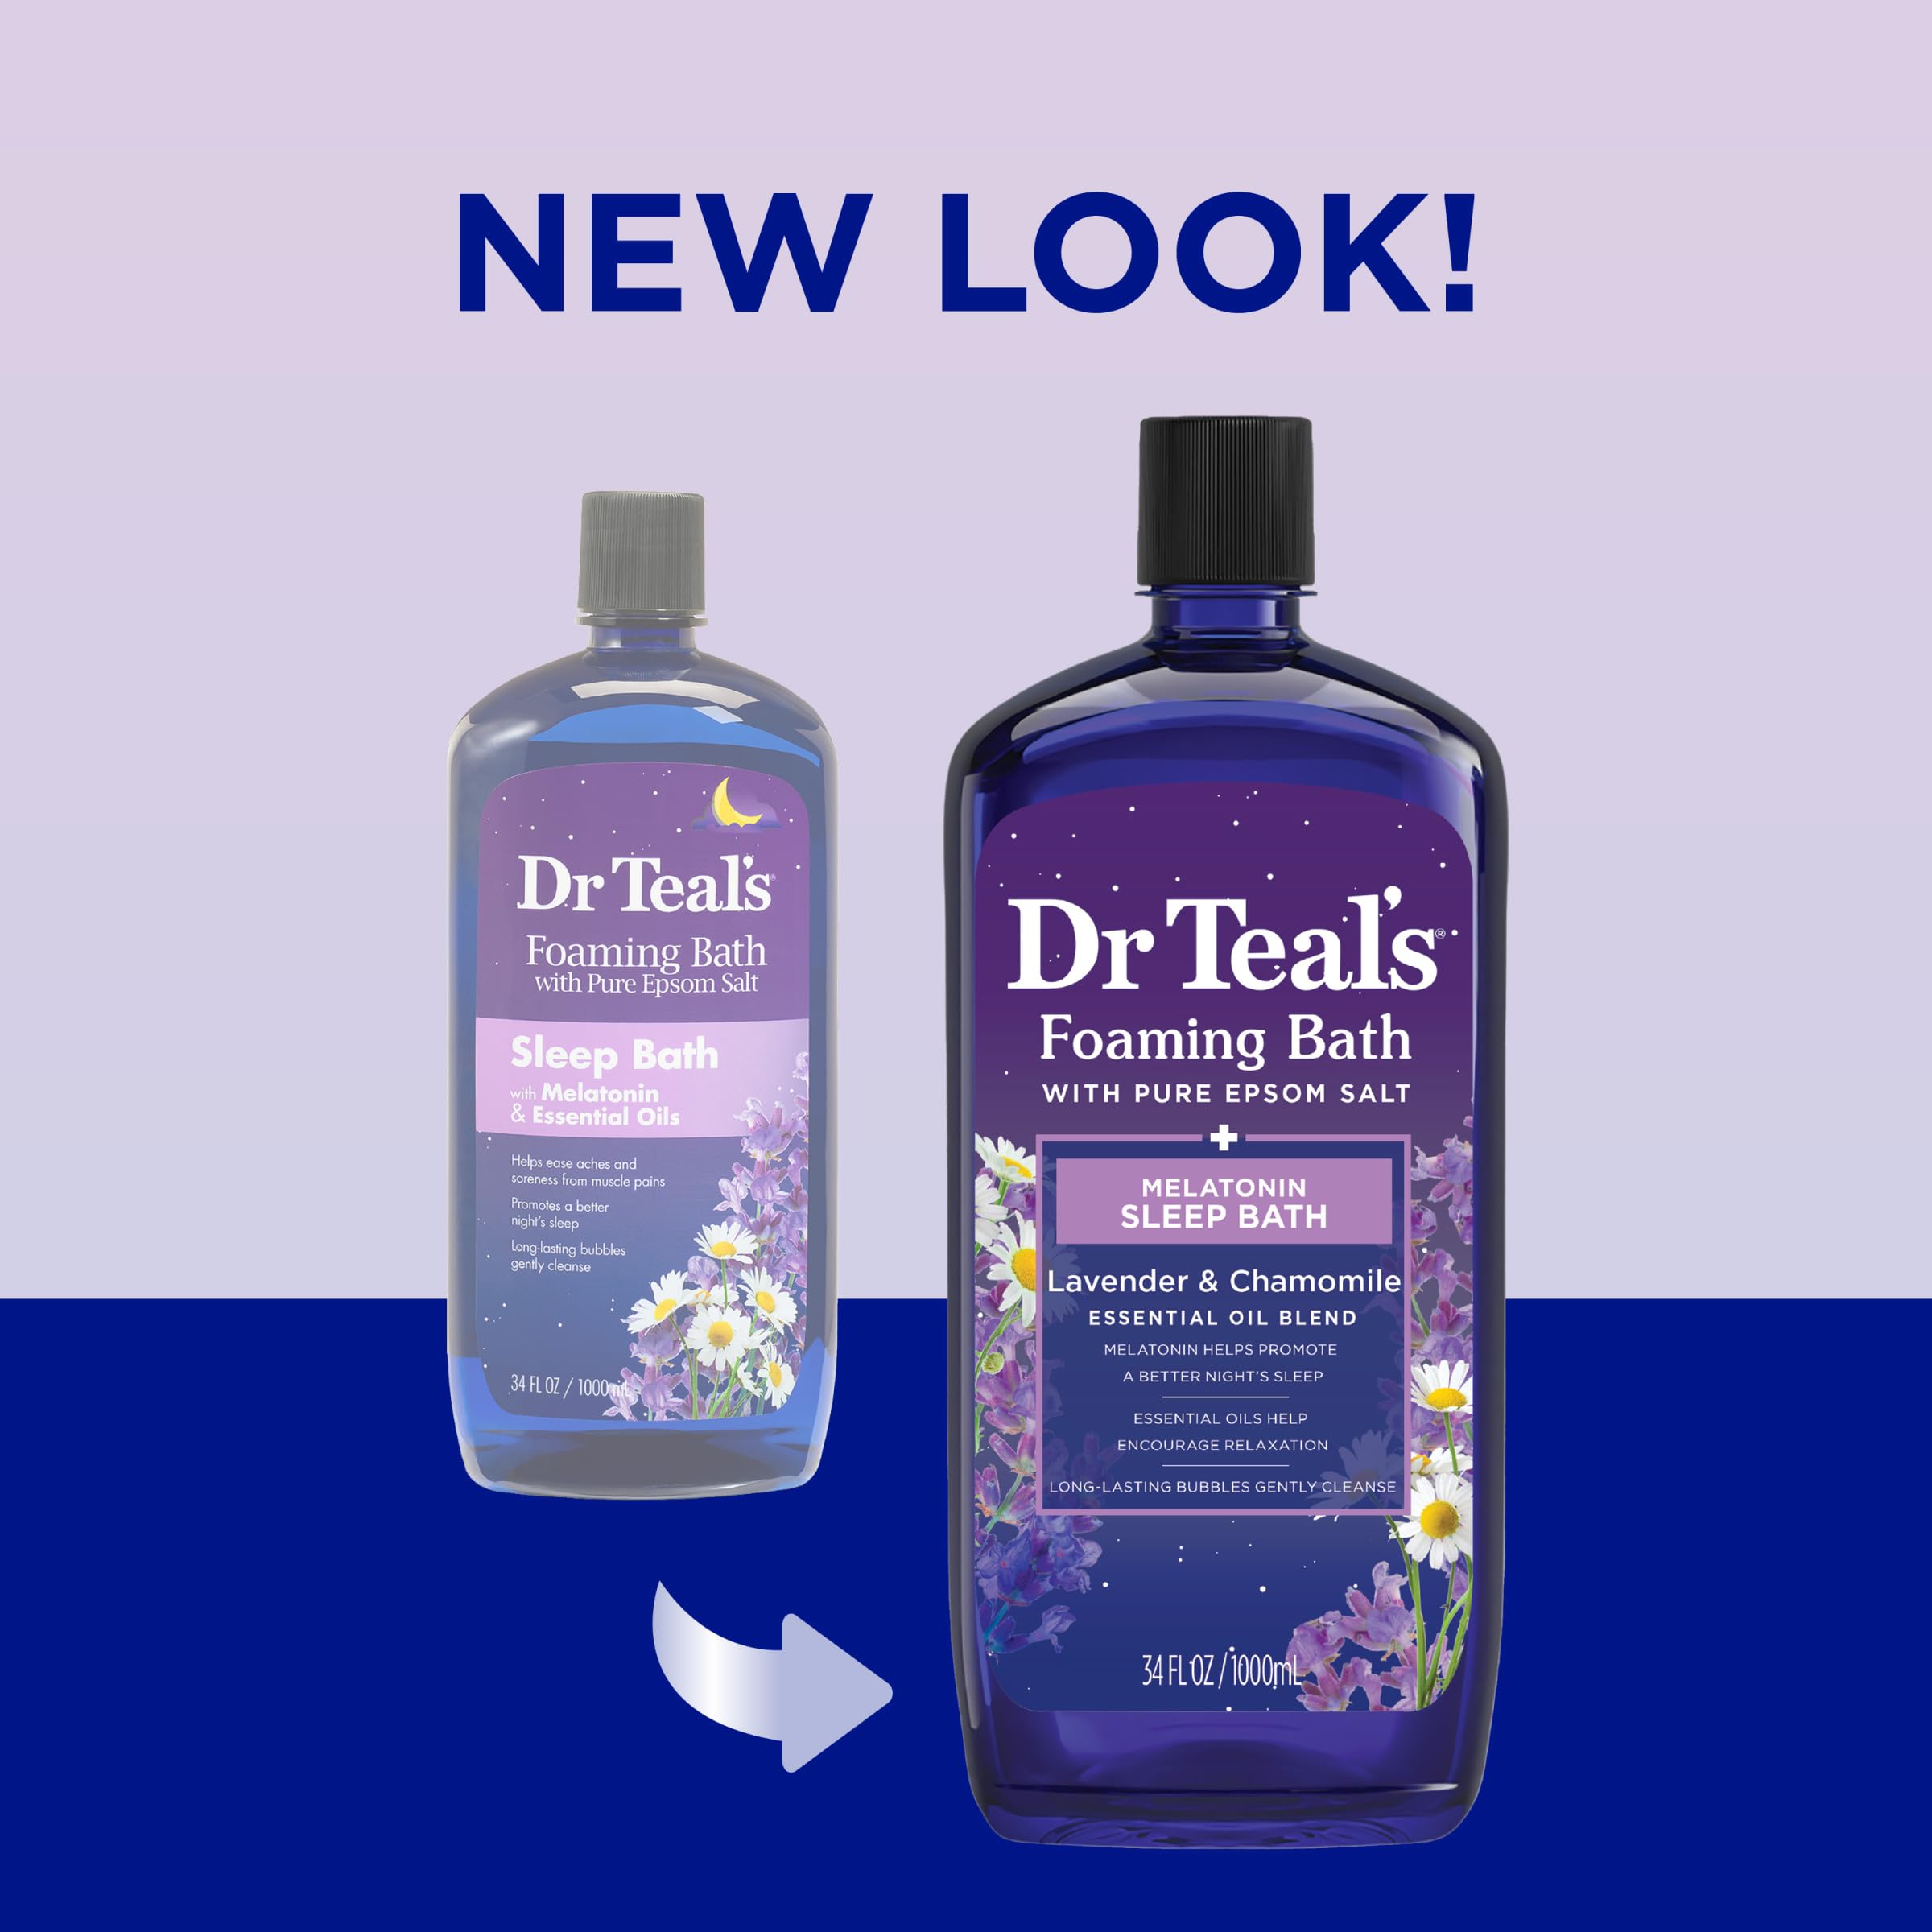 Dr Teal's Foaming Bath with Pure Epsom Salt, Sleep Blend with Melatonin, Lavender & Chamomile Essential Oils, 34 fl oz (Pack of 2) (Packaging May Vary)